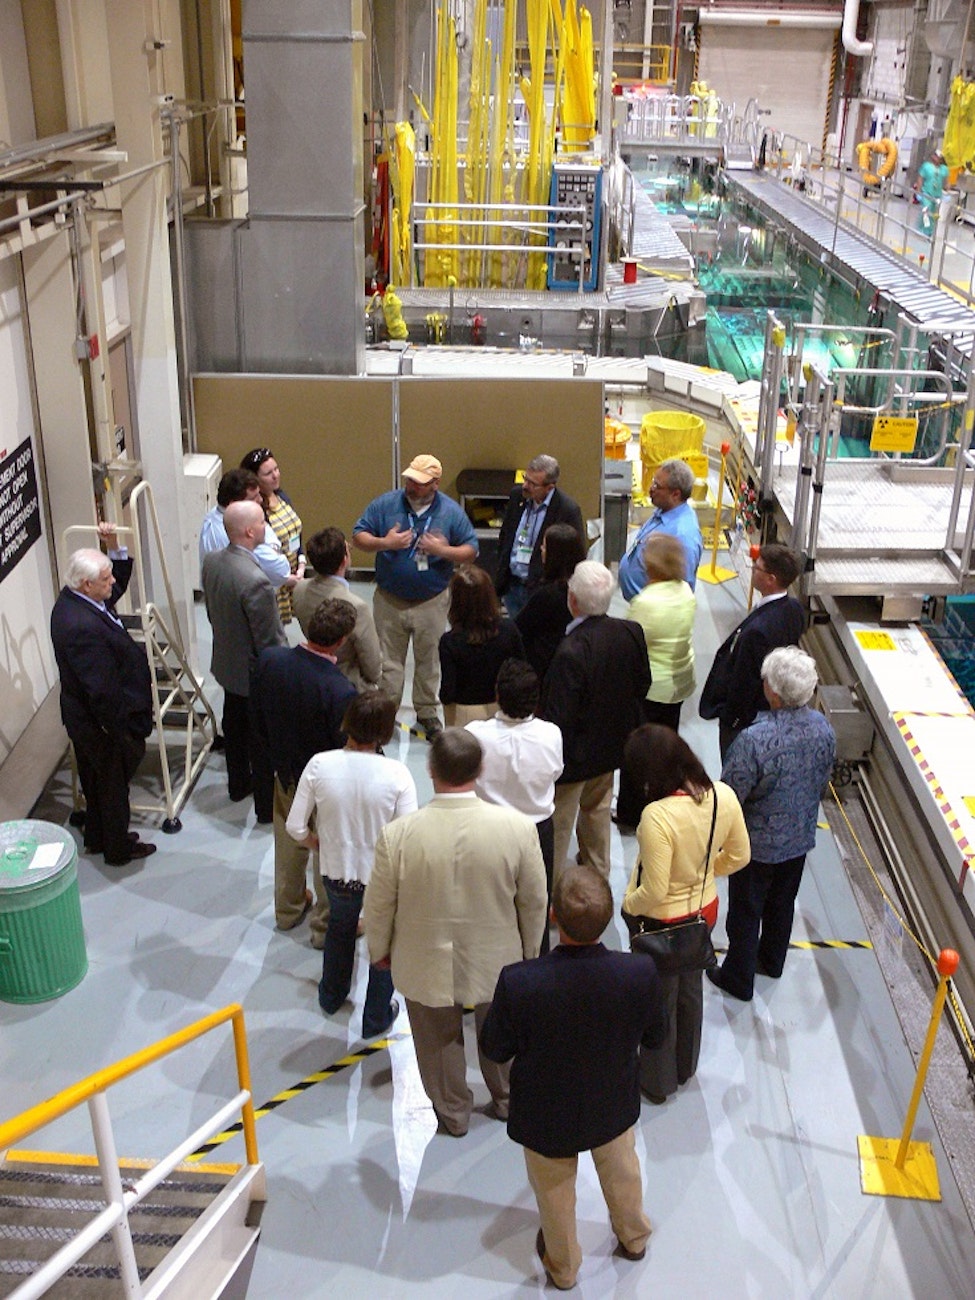 What To Expect On A Tour Of Idaho National Laboratory Inl 0184